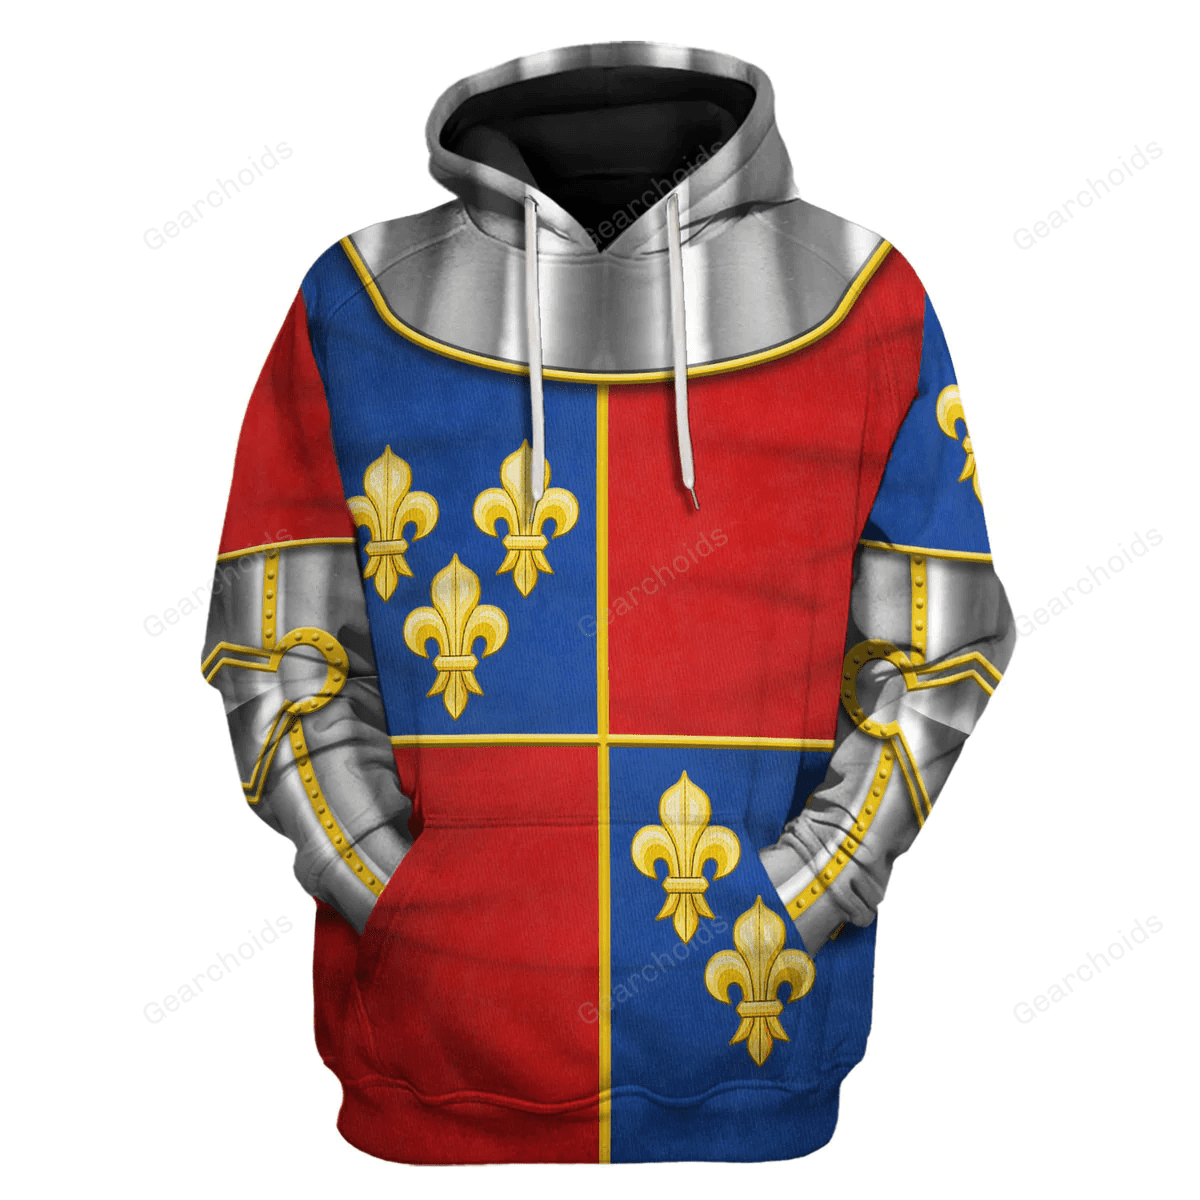 Gearchoids 1415 Agincourt Charles I d'Albret Knight Costume Hoodie Sweatshirt T-Shirt Tracksuit